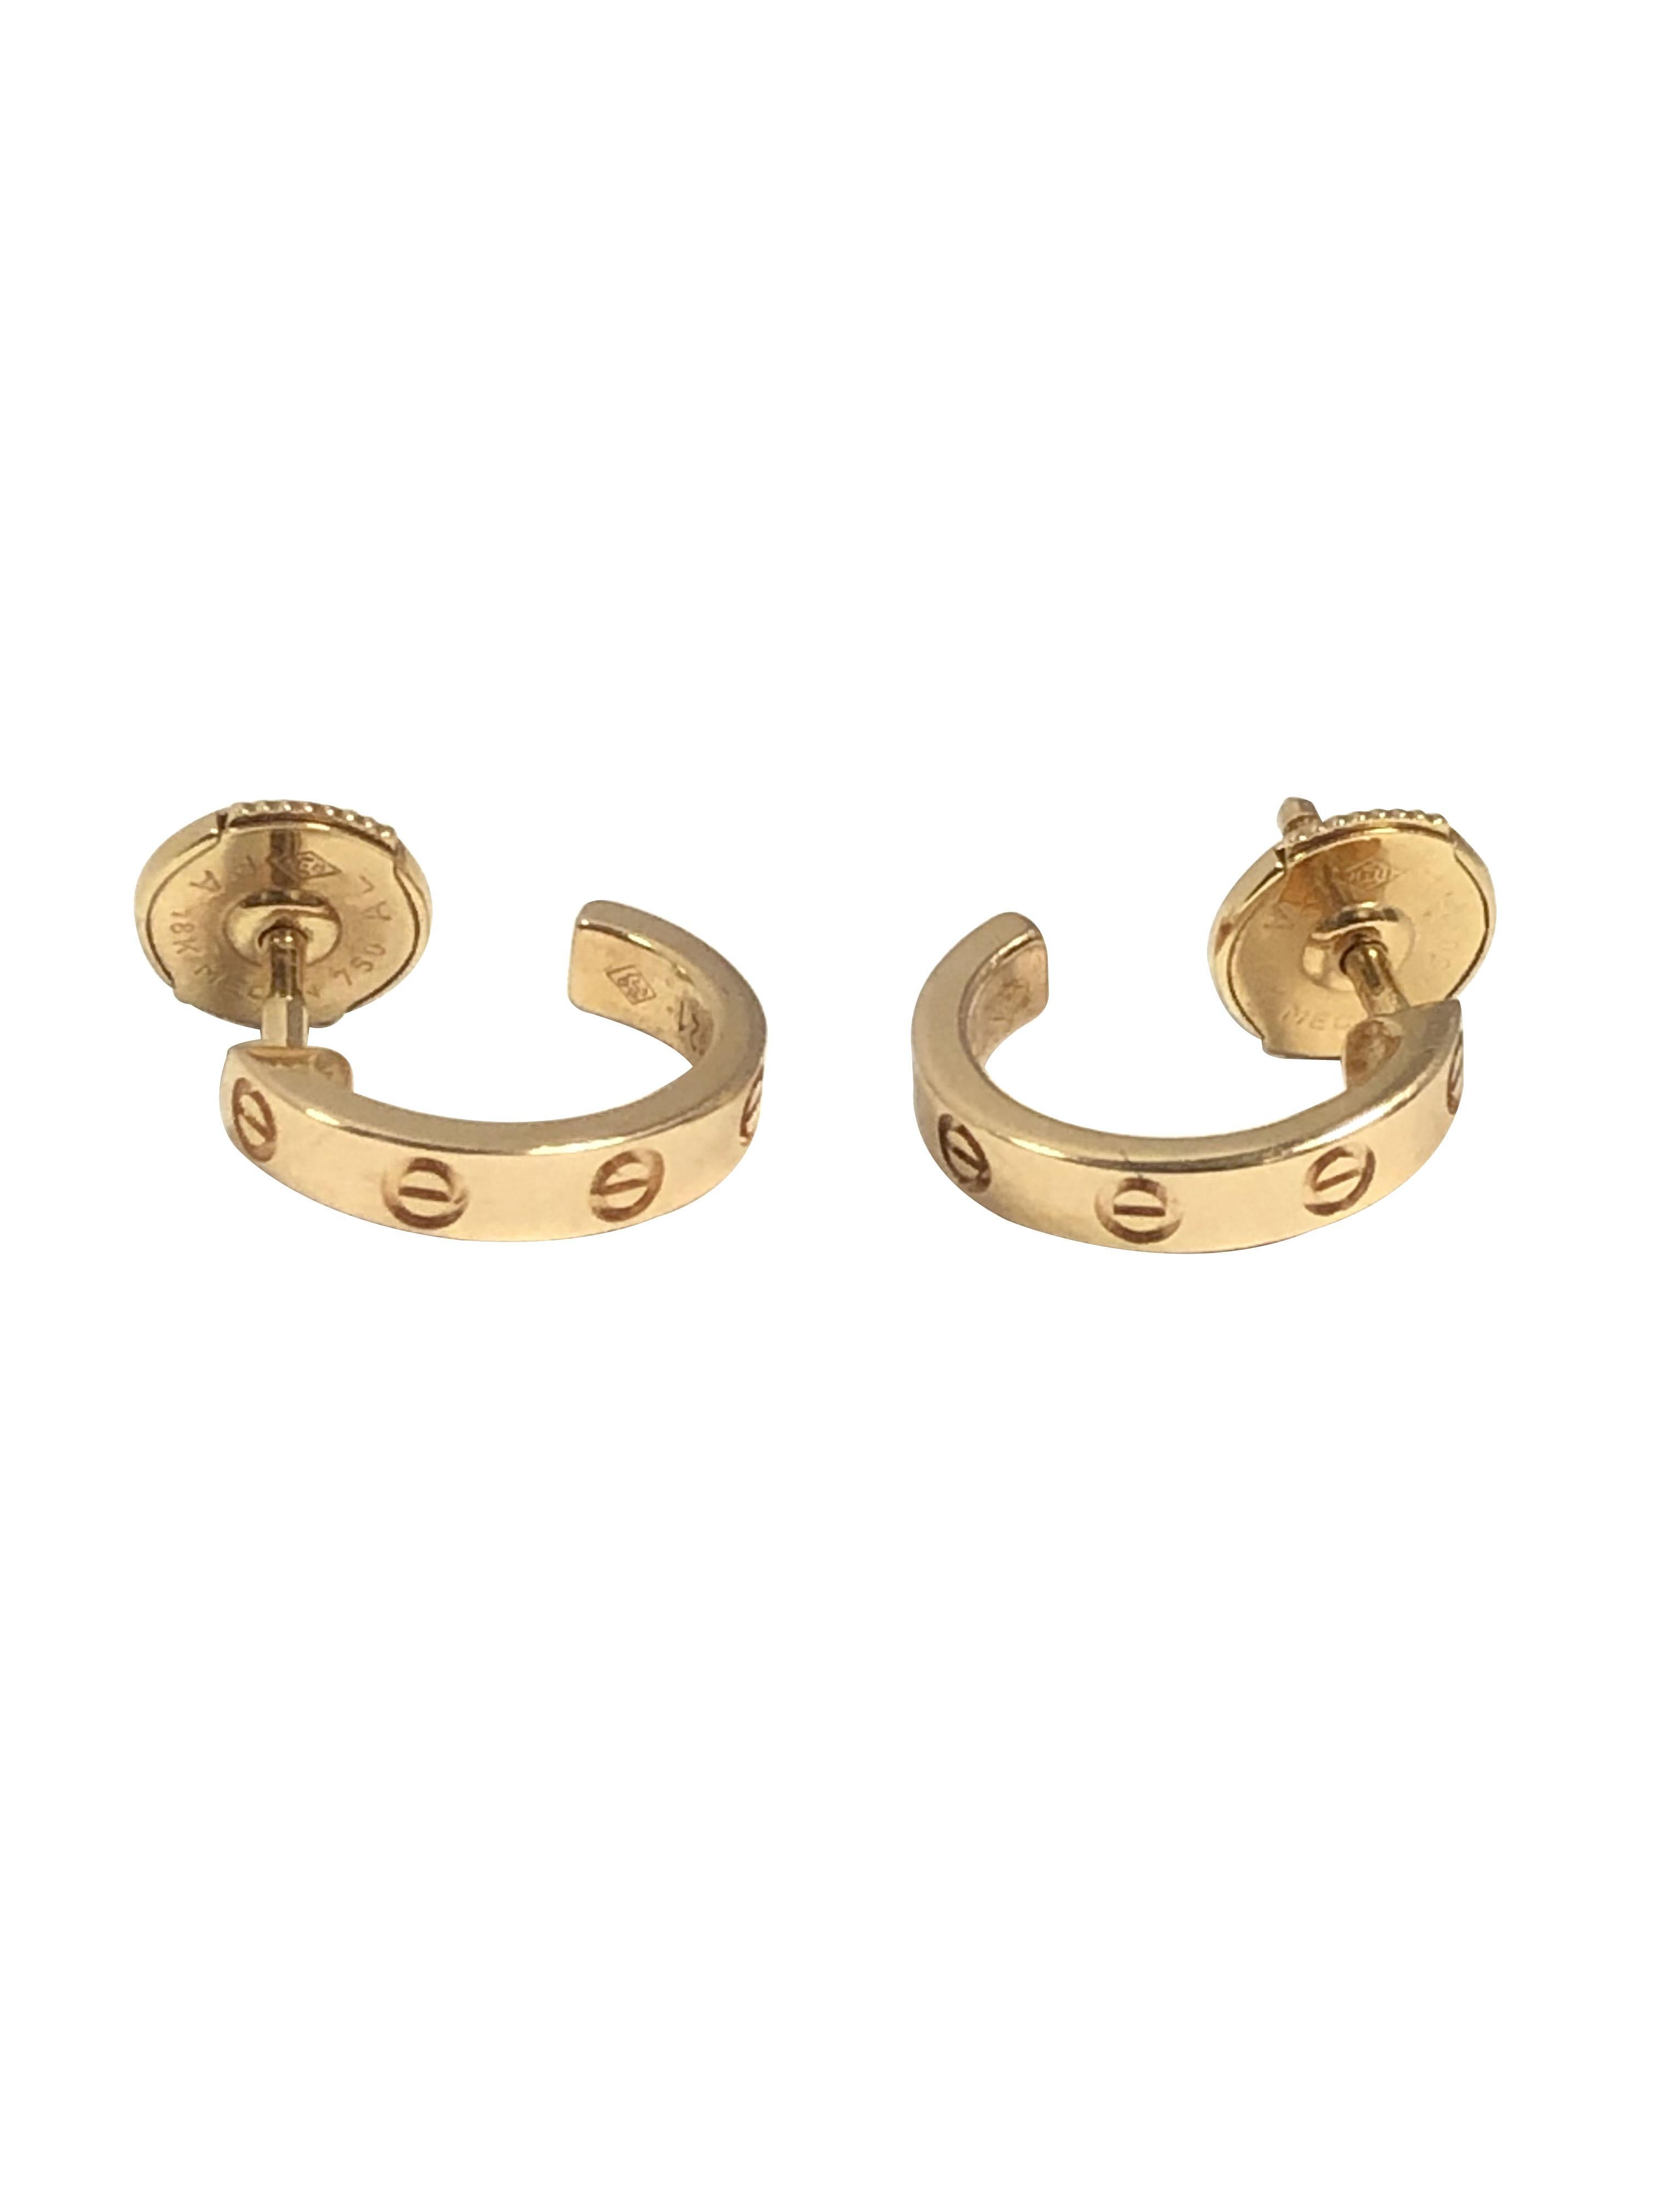 Circa 2015 Cartier Love Collection small 18K Yellow Gold half hoop, Hugge style earrings, measuring 1/2 inch in length and 2.5 M.M. Wide. Signed and Numbered, come in original Presentation box.